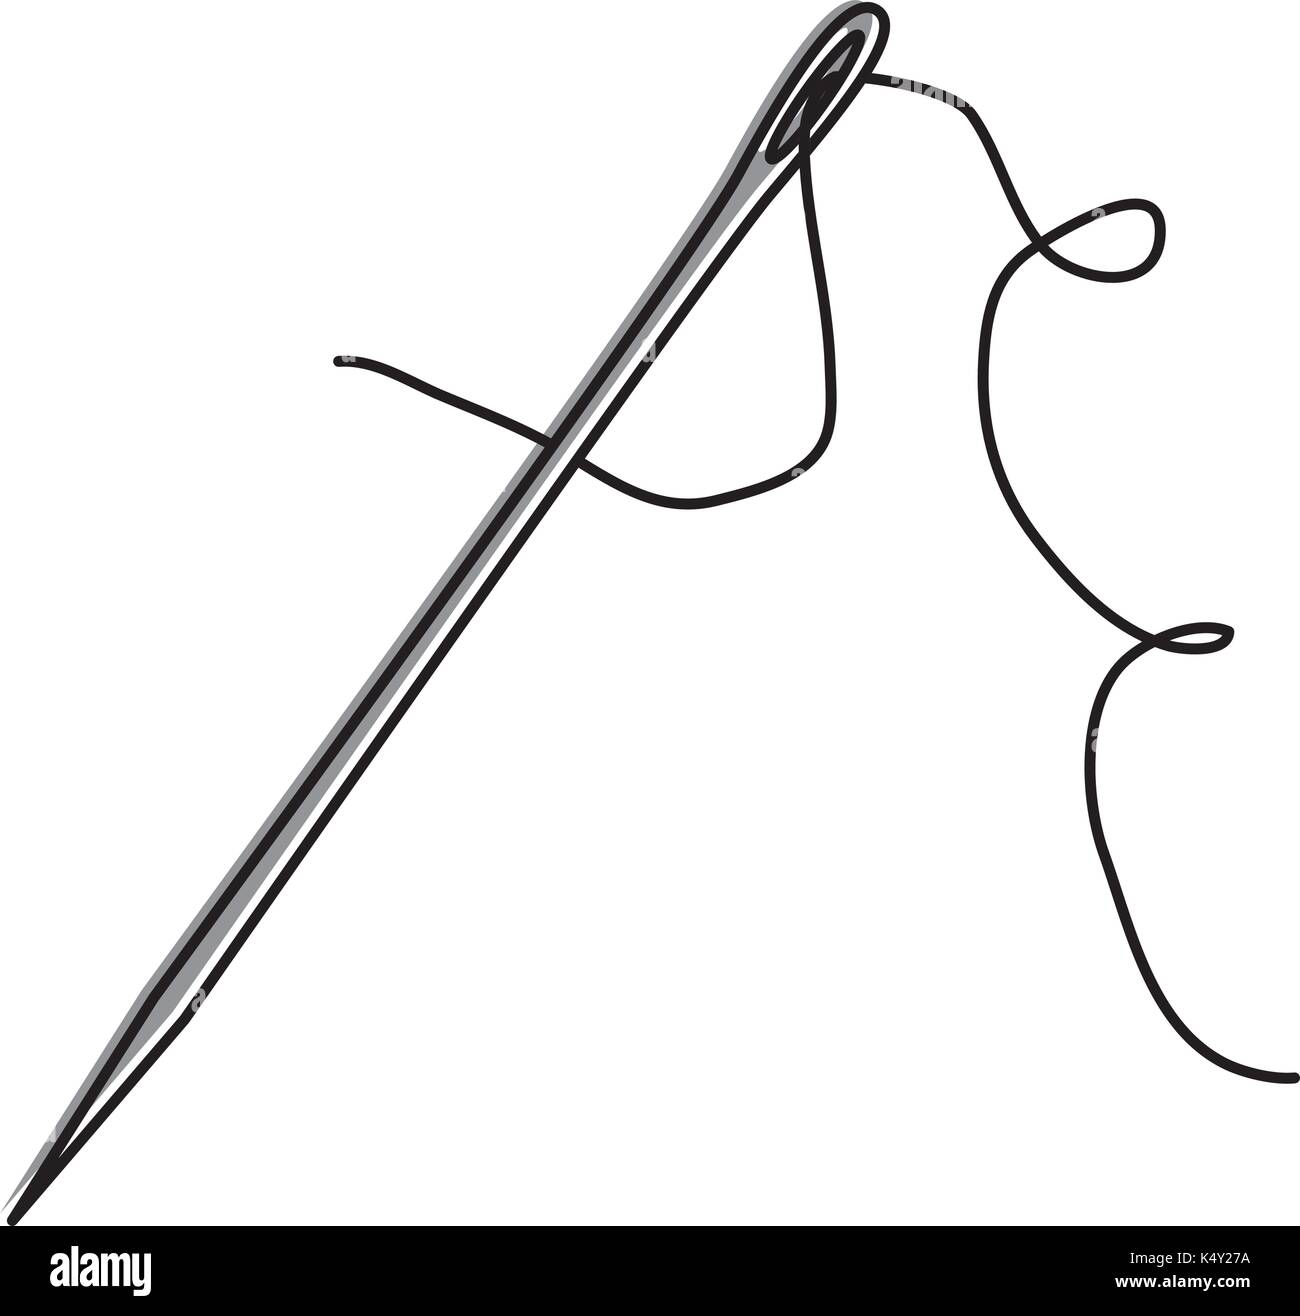 Sewing needle threader tool in use and a single black string Stock Photo -  Alamy